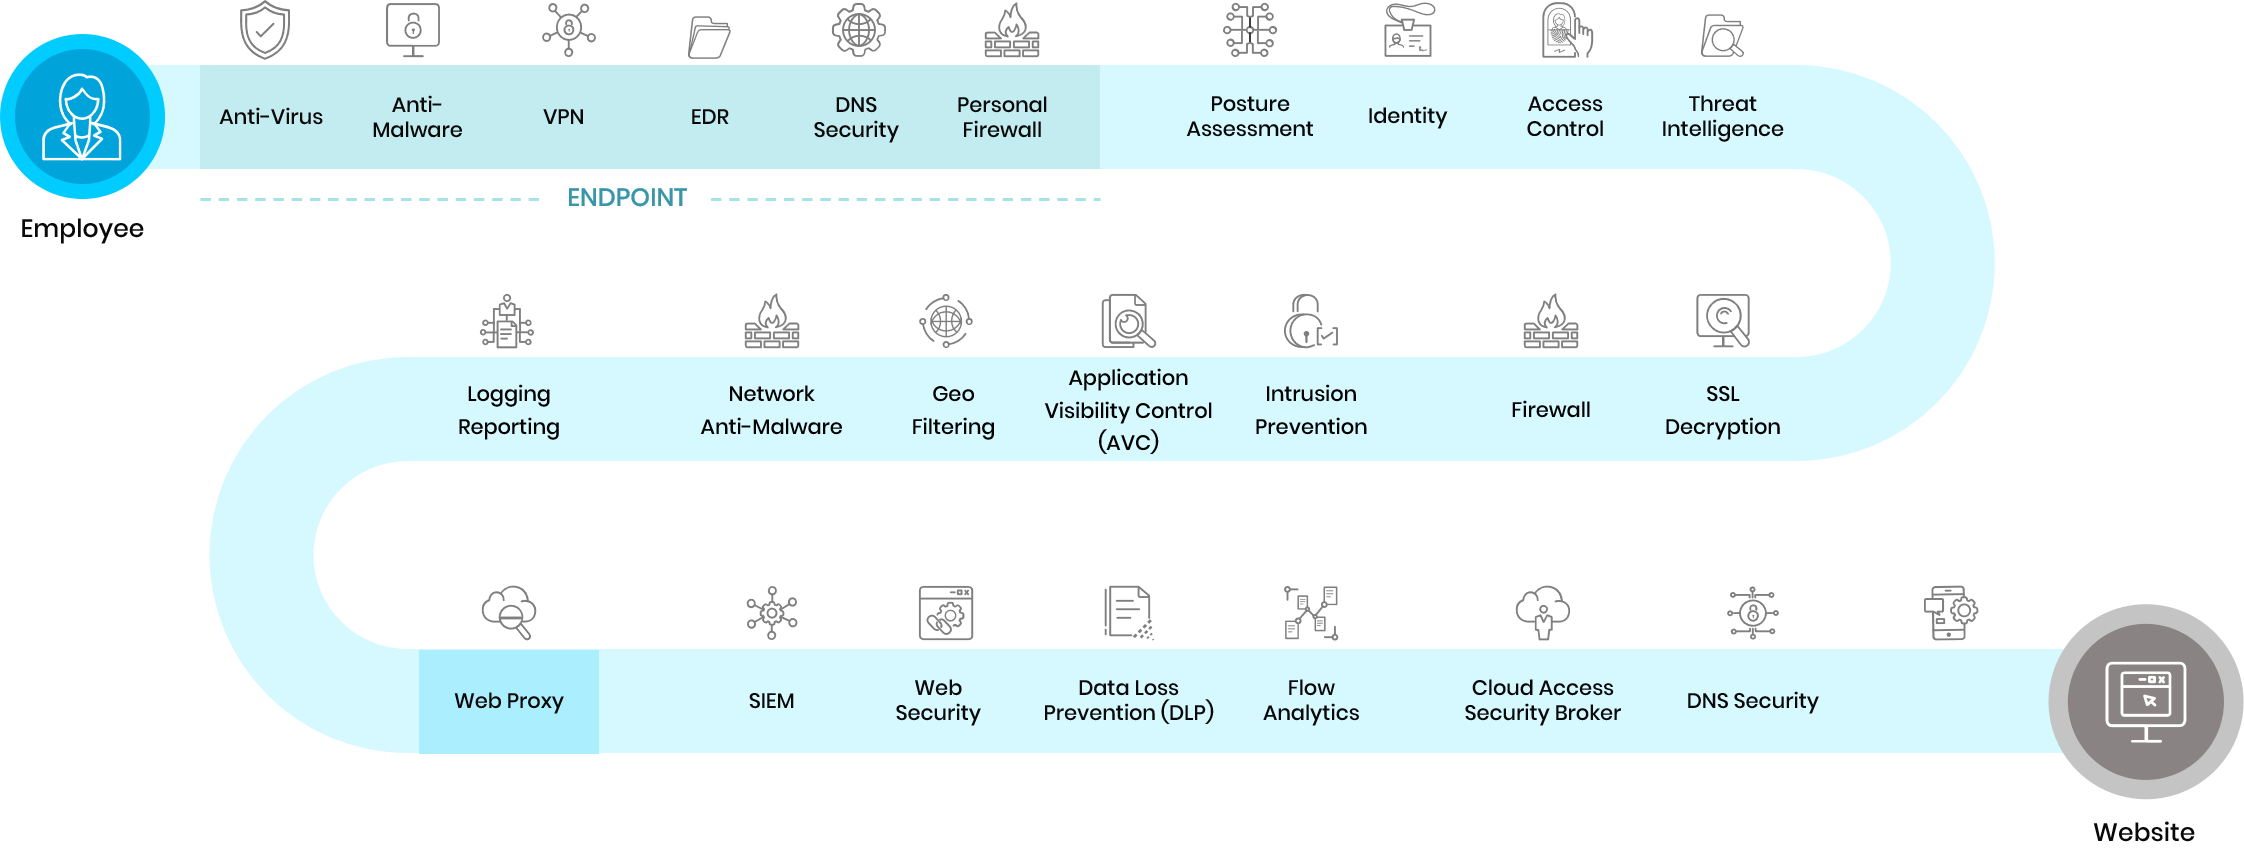 Chart showing the steps between employee and data access